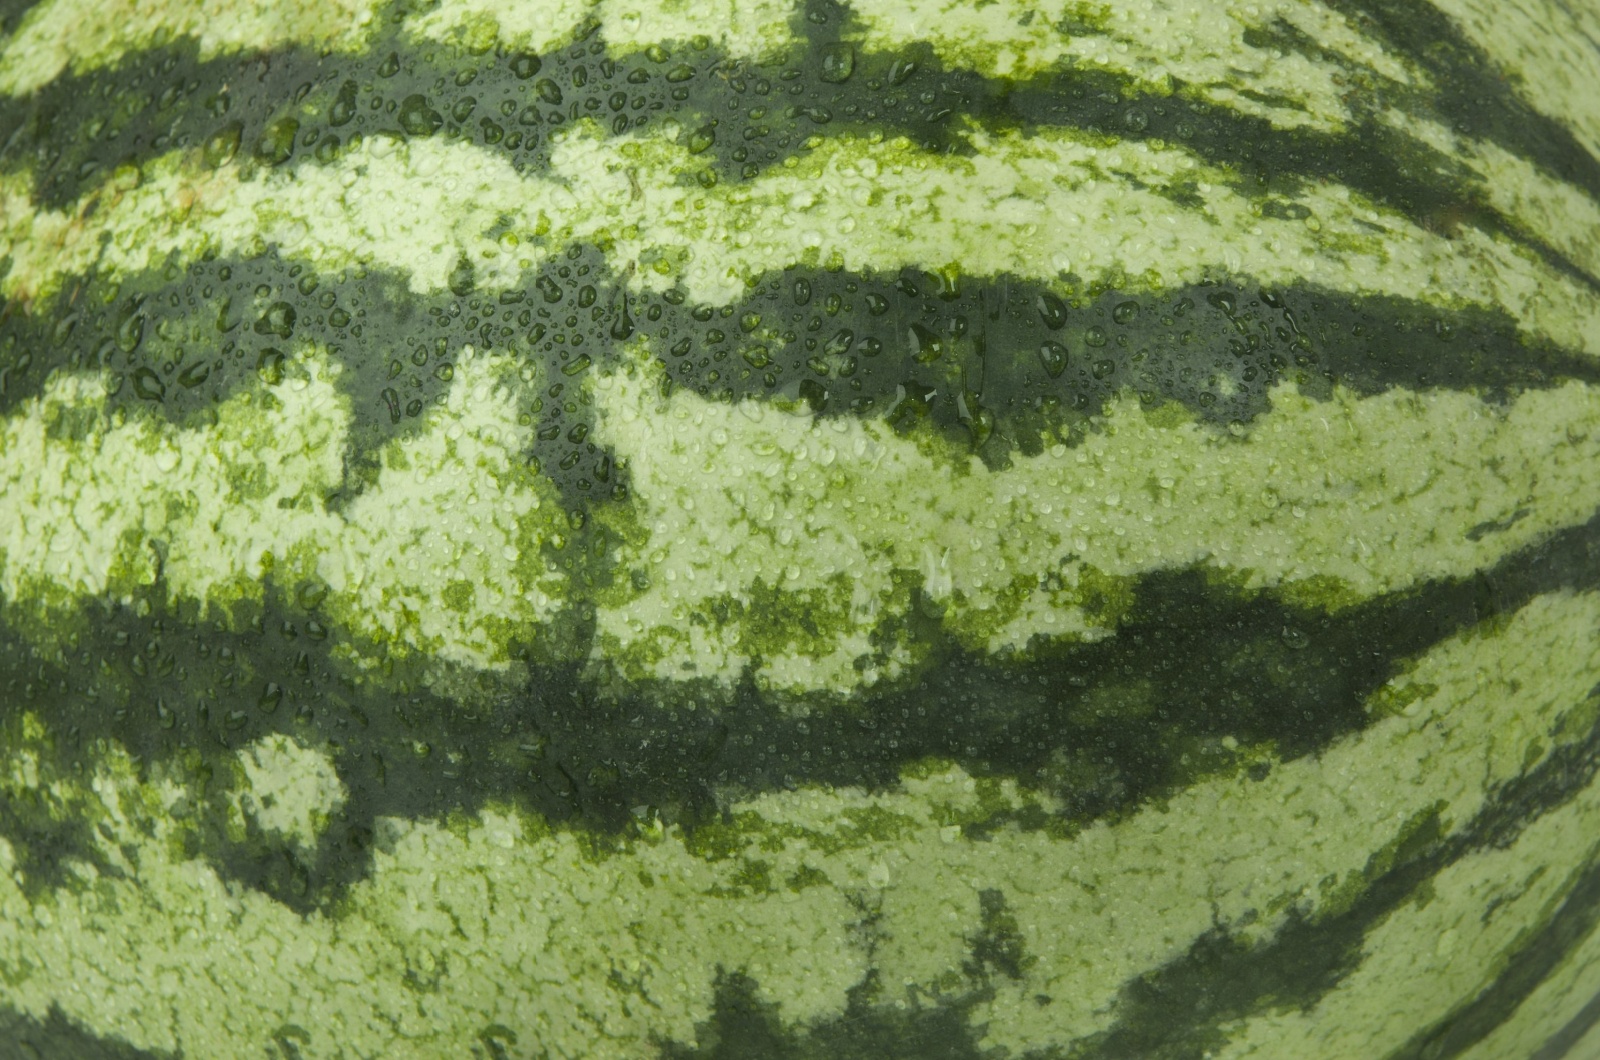 Green striped texture of the rind of watermelon